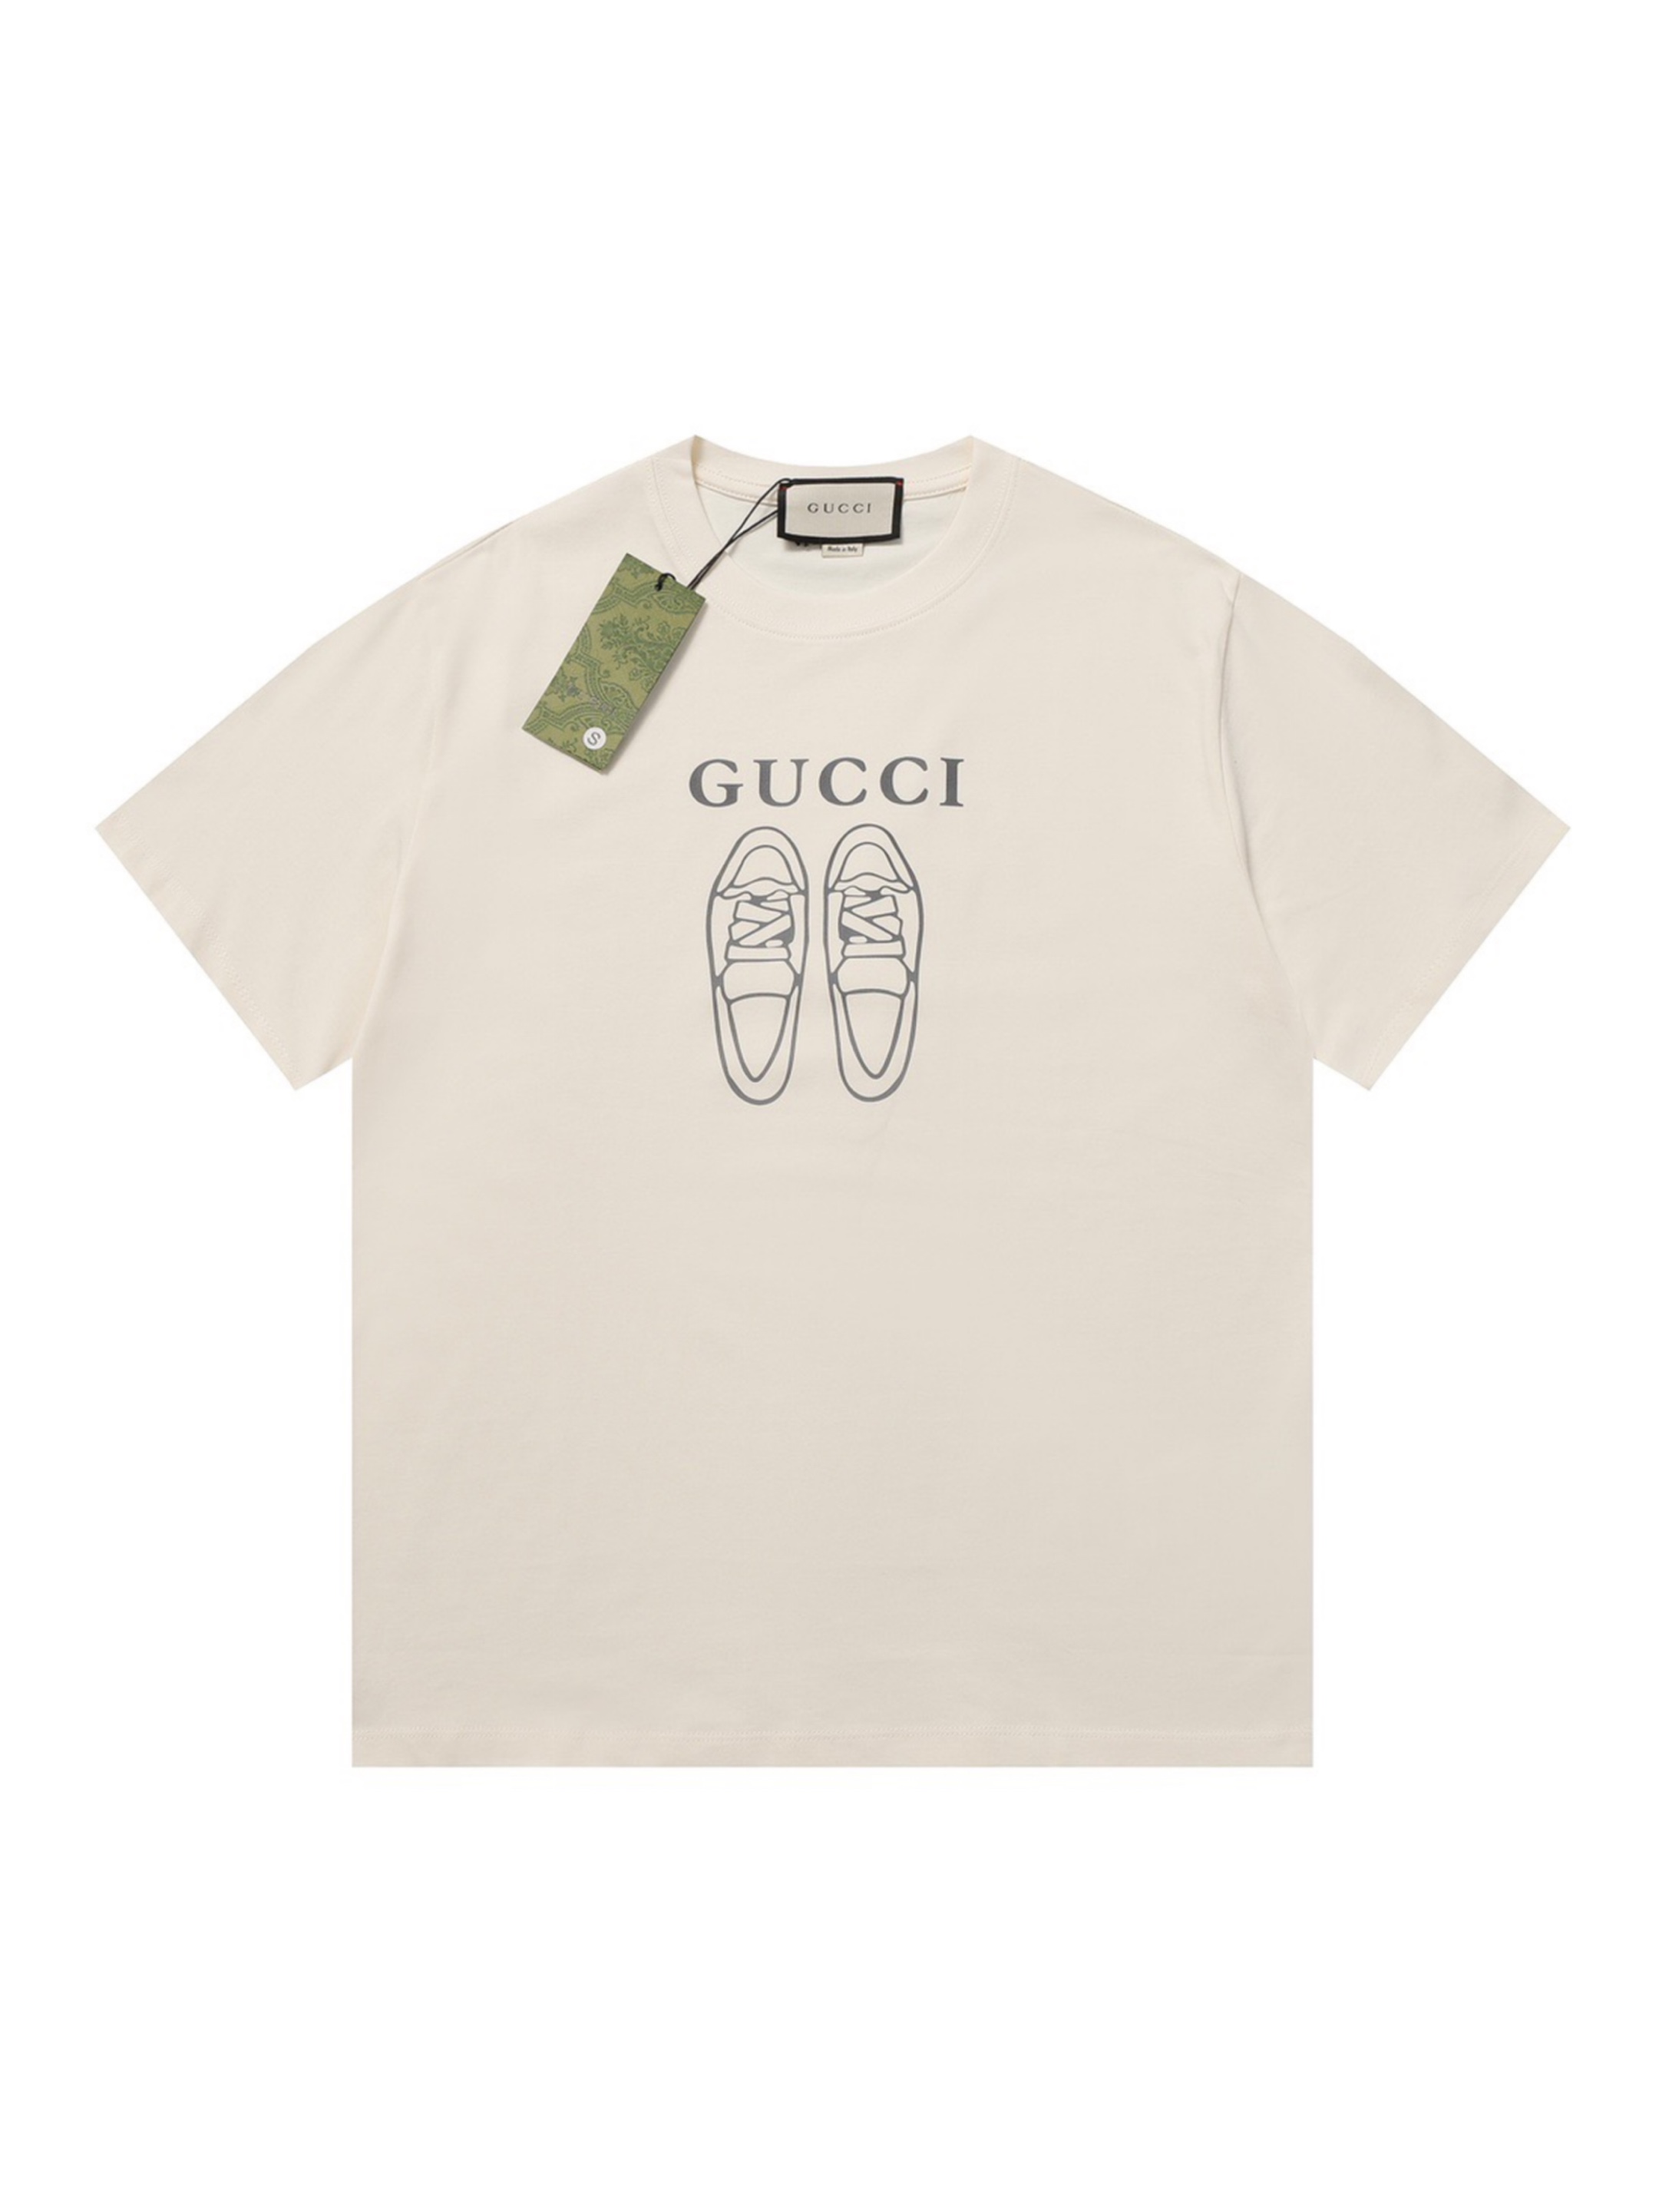 Gucci Shoes Sketch Embroidered Cotton Beathable Unisex Fashion Short Sleeve